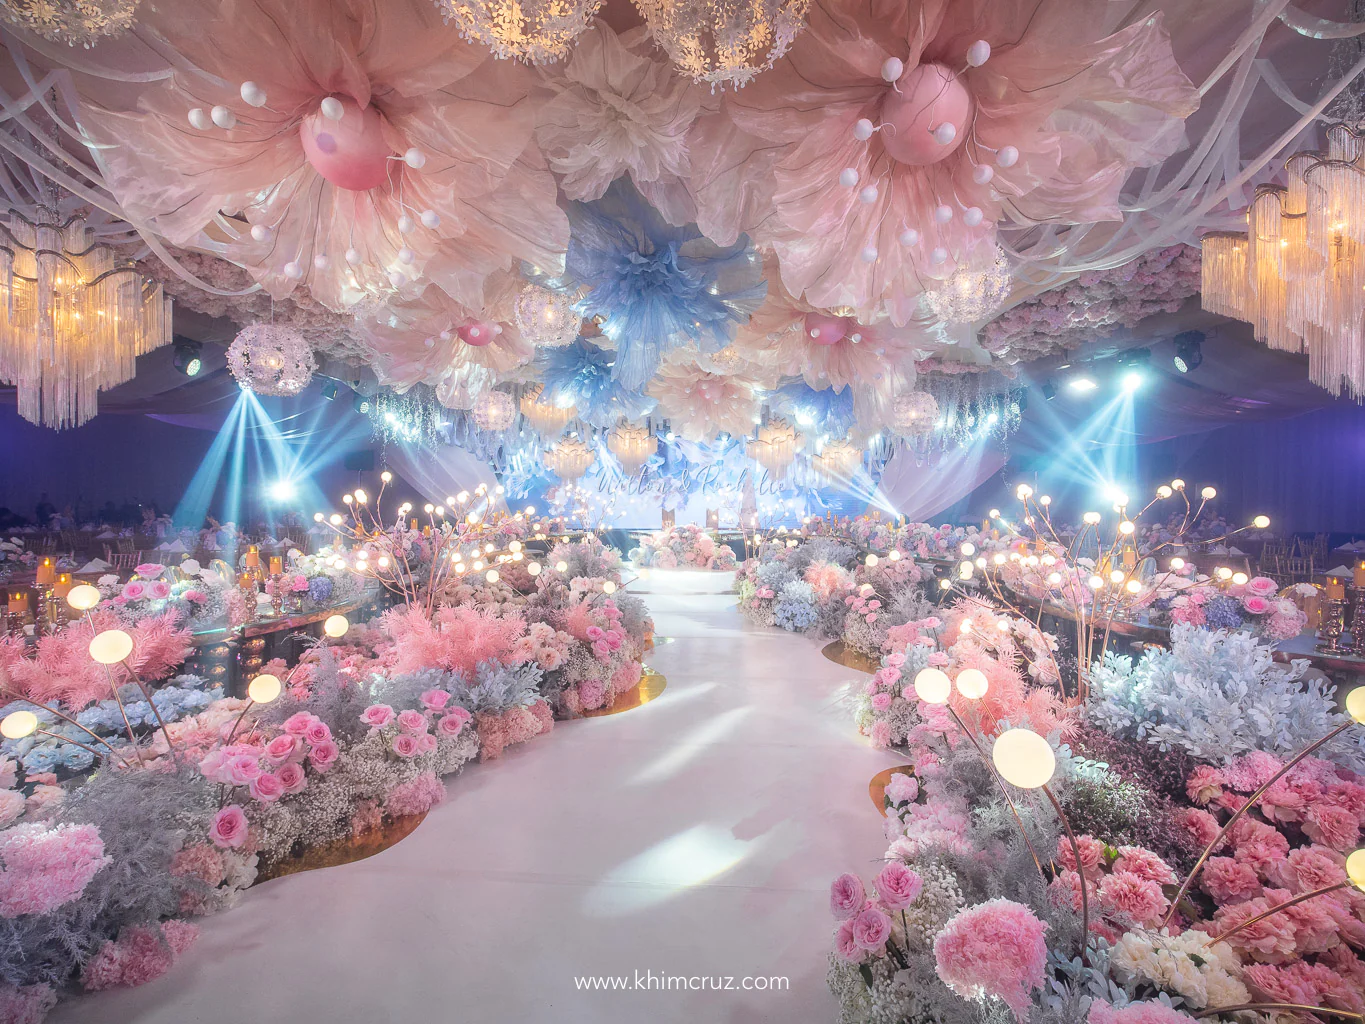 dreamy floral escape wedding hanging oversized floral designs and chandeliers on top of breathtaking floral landscape